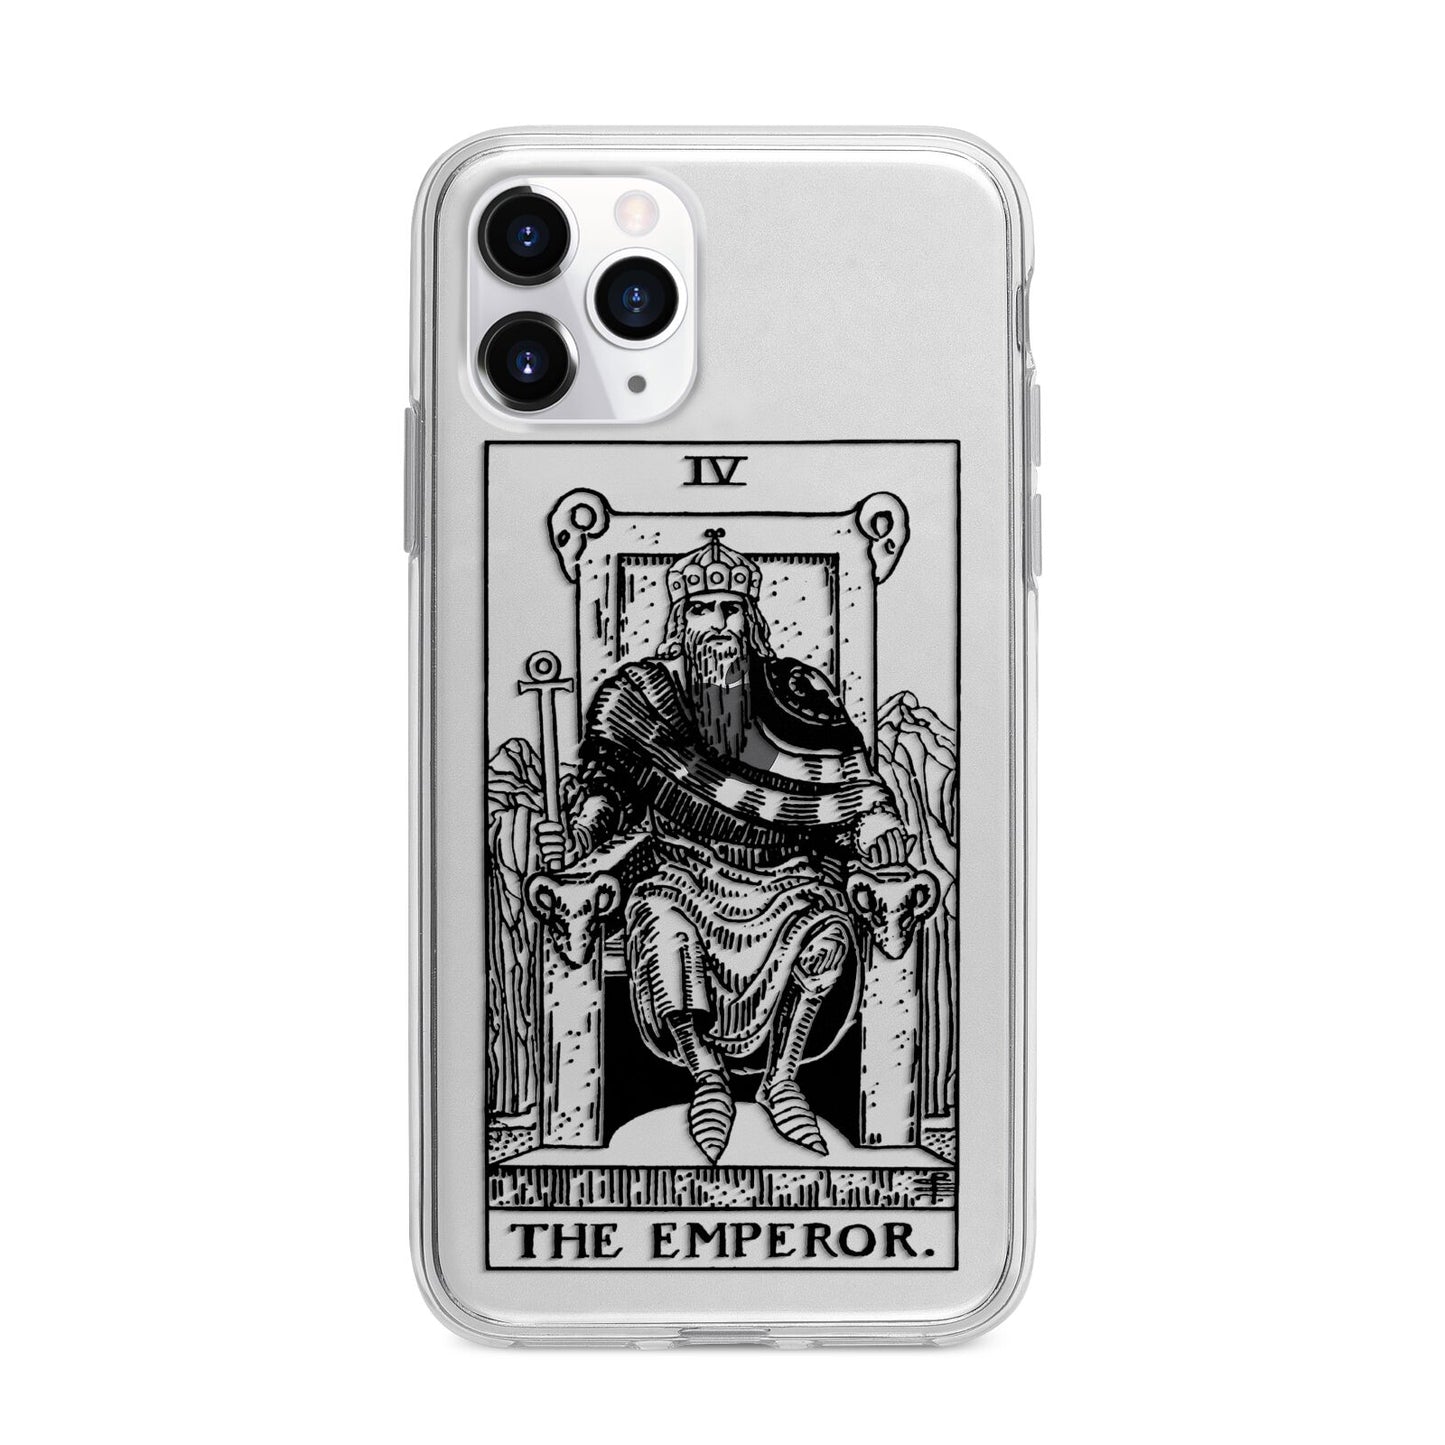 The Emperor Monochrome Tarot Card Apple iPhone 11 Pro in Silver with Bumper Case